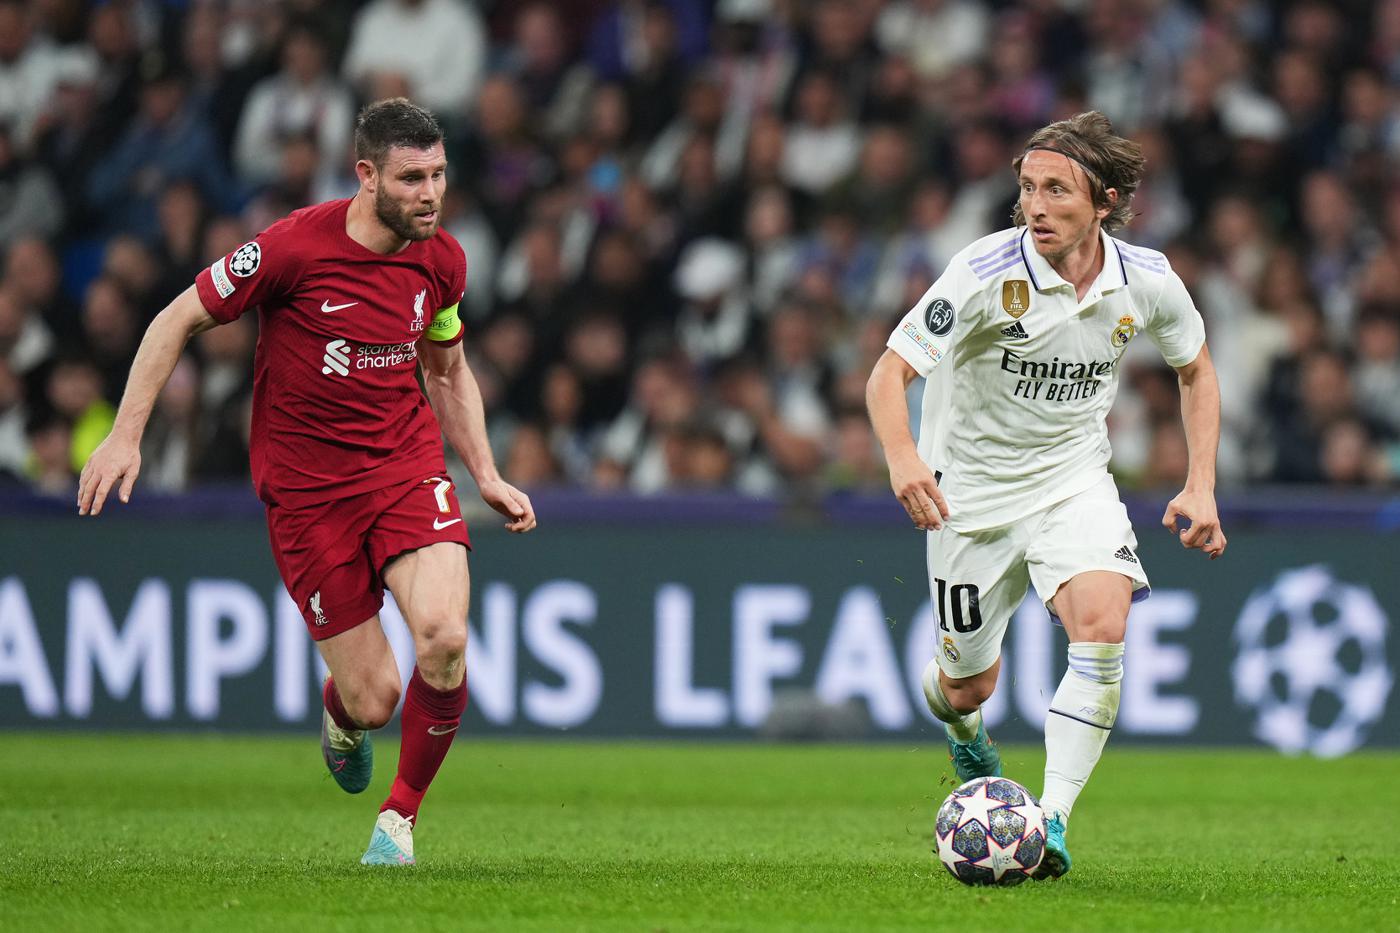 Real Madrid v Liverpool - 1:0. Champions League. Match review, statistics